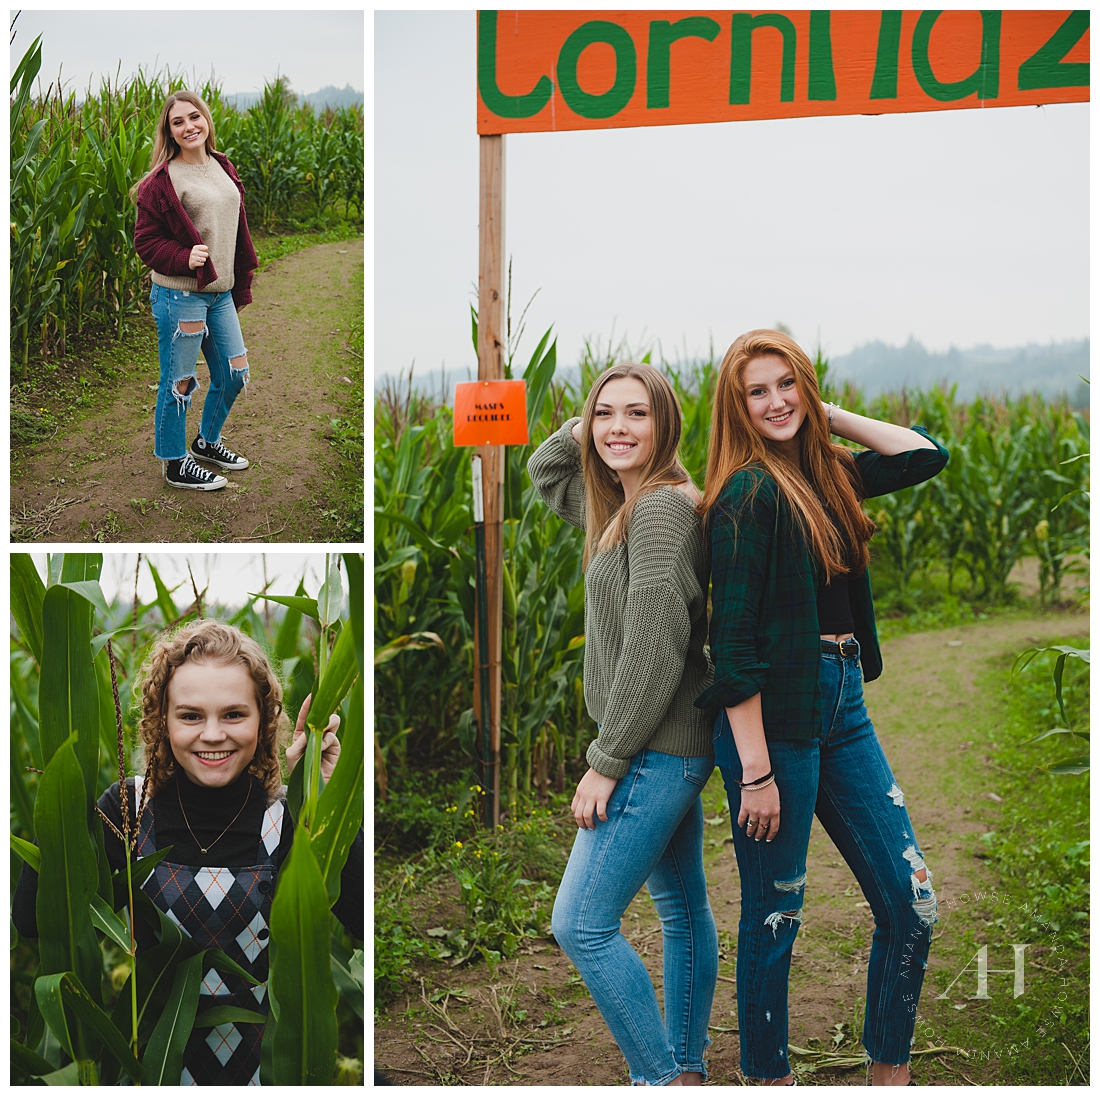 Corn Maze Portraits in Puyallup | AHP Model Team Posing with Friends on the Farm | Photographed by Tacoma Senior Photographer Amanda Howse